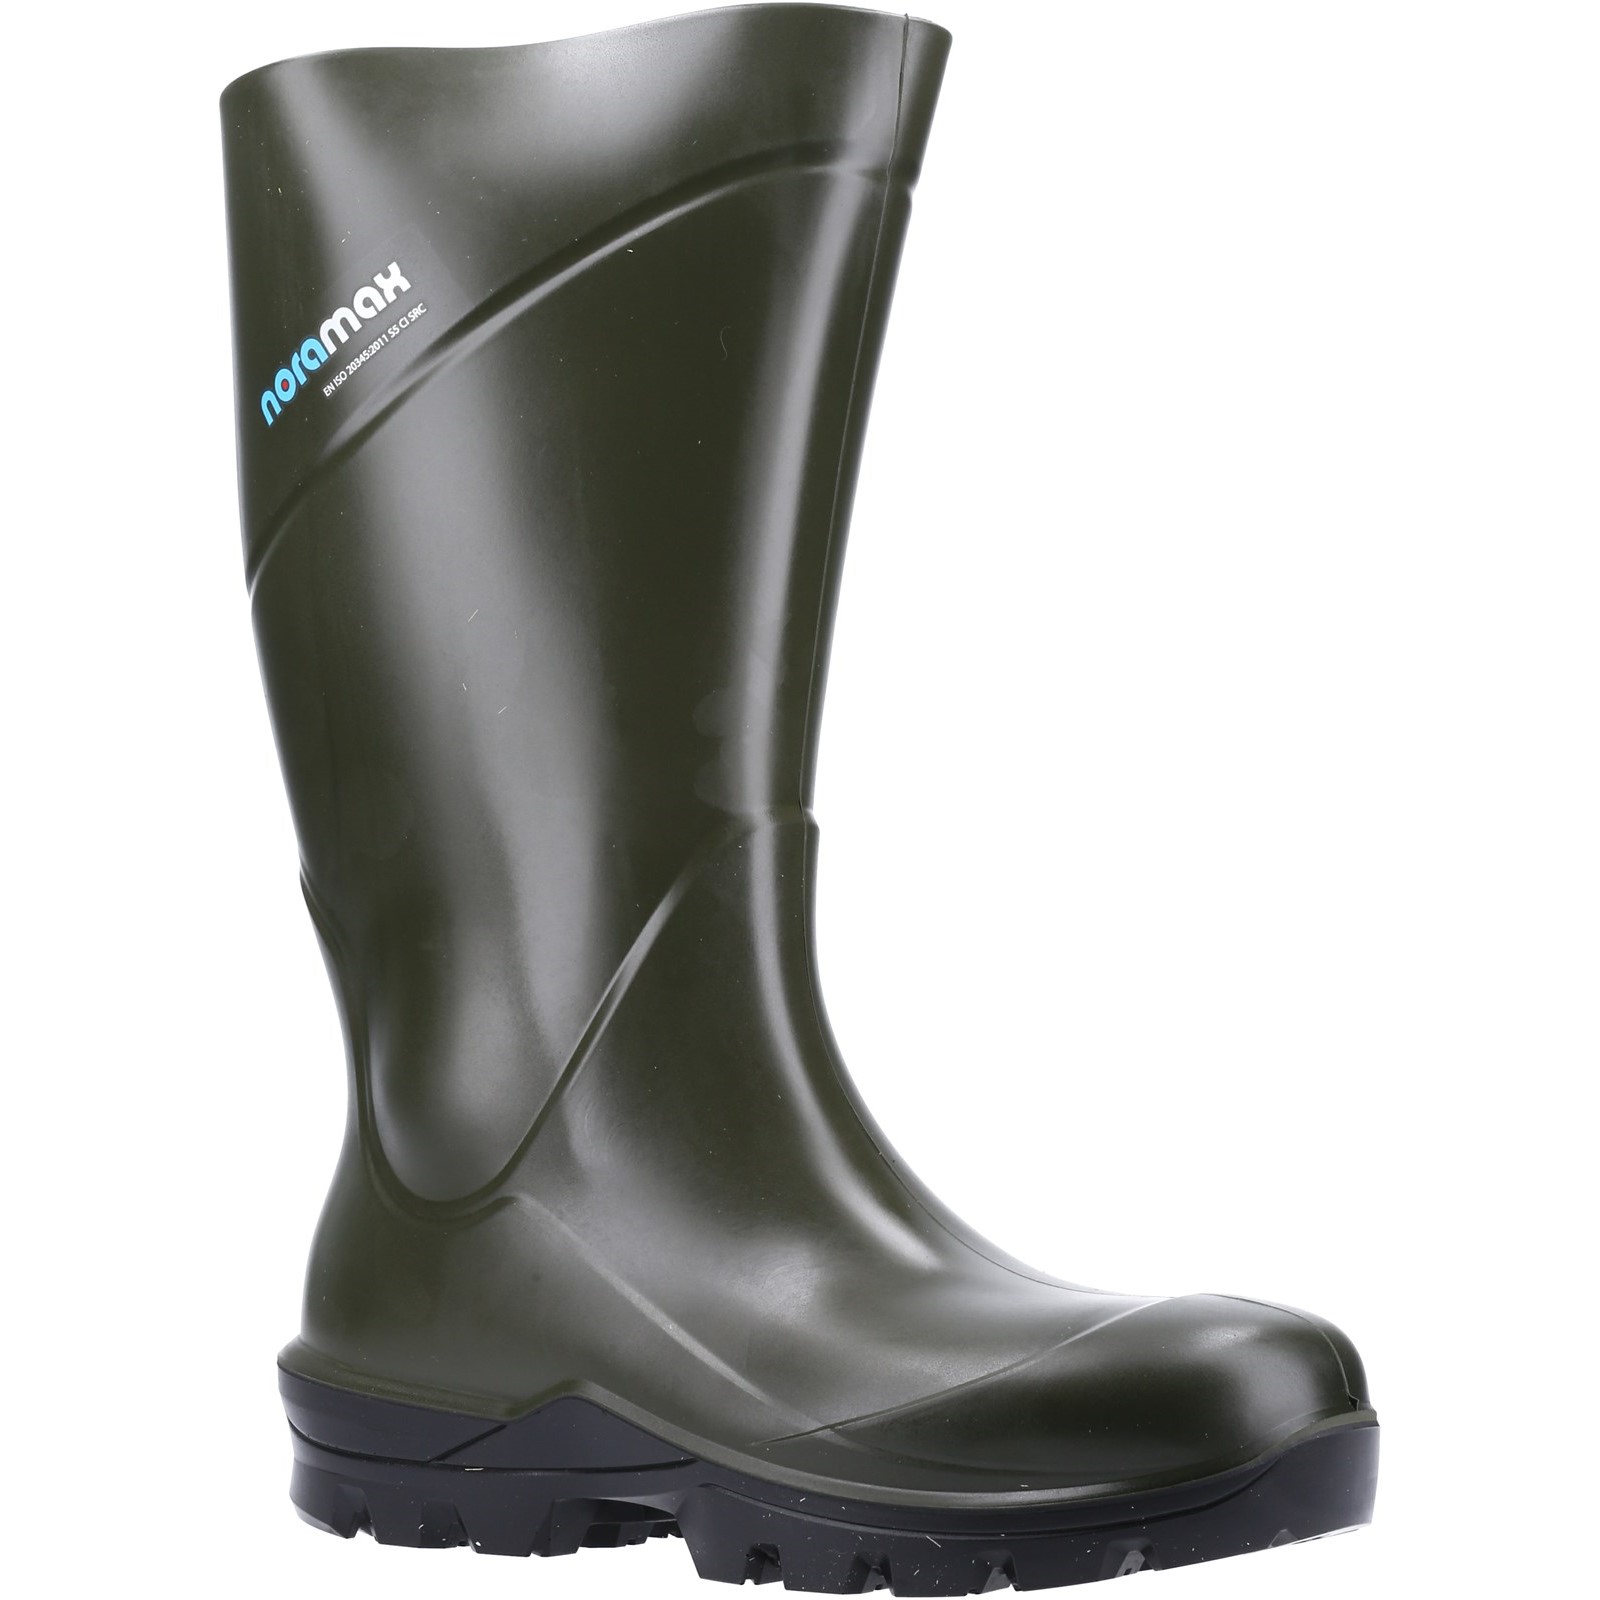 Noramax Pro S5 Full Safety Polyurethane Boot